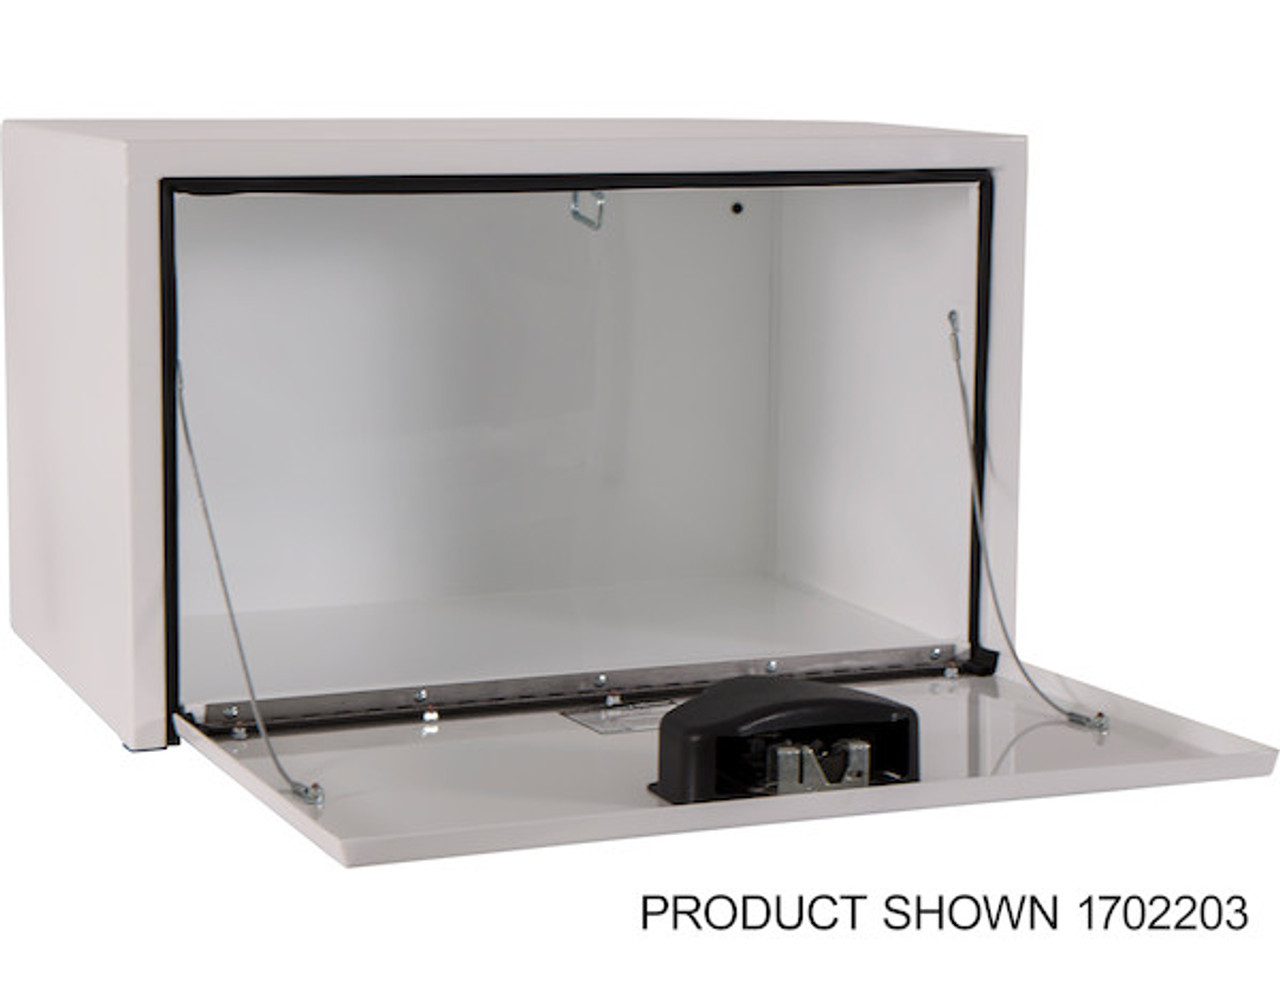 1703205 - 14x16x36 Inch White Steel Underbody Truck Box with Paddle Latch